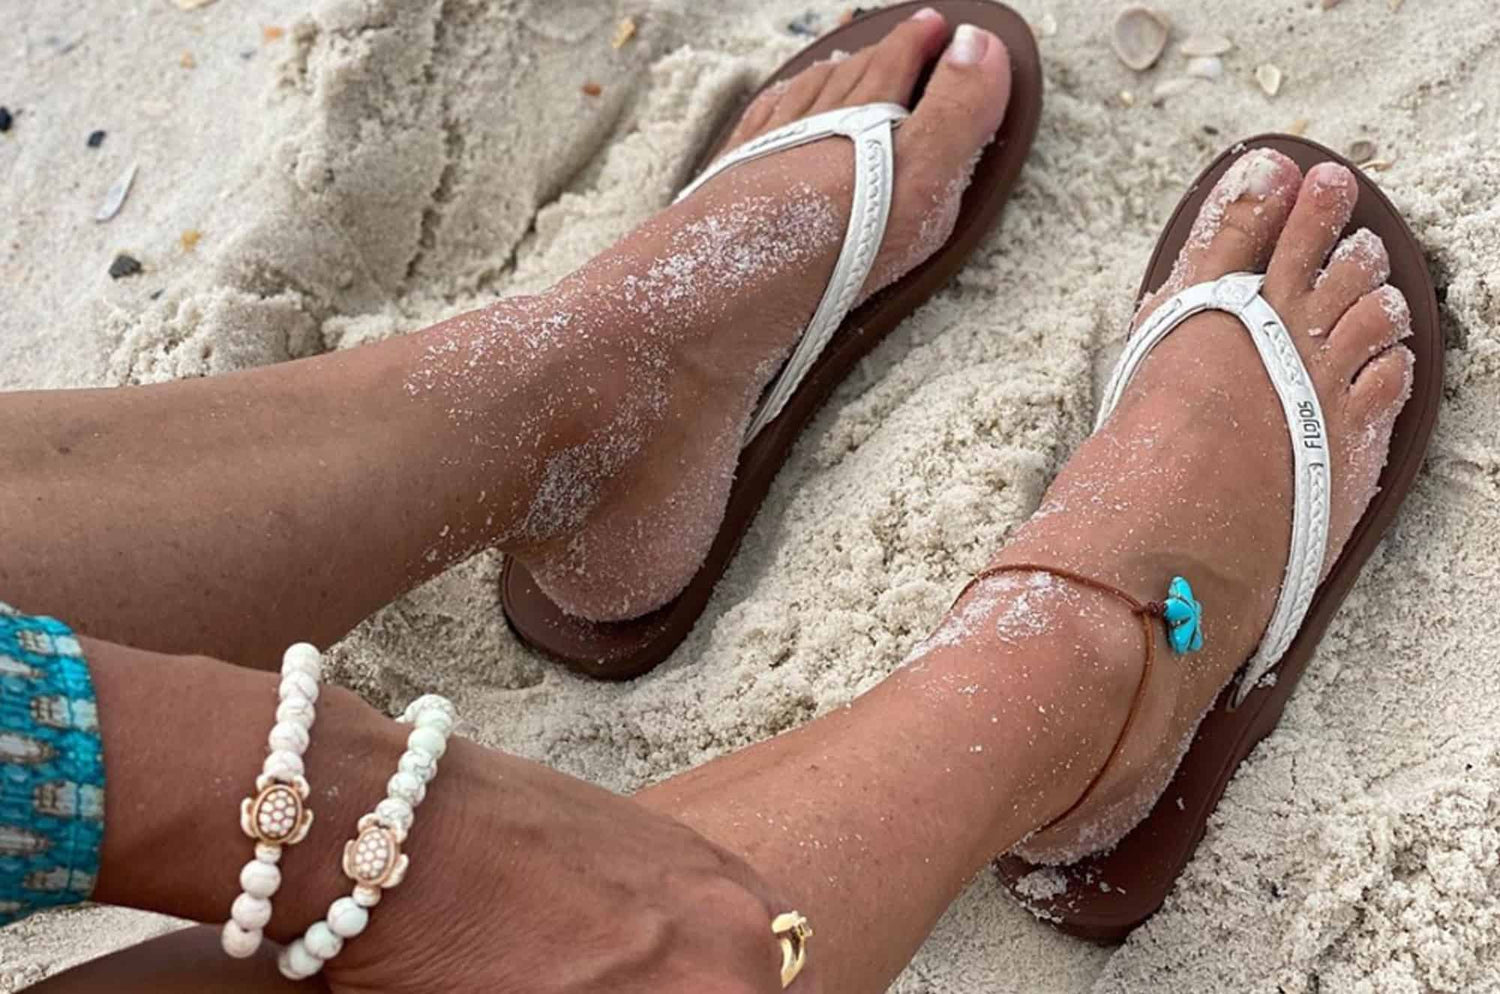 How to Clean Flip Flops the Right Way